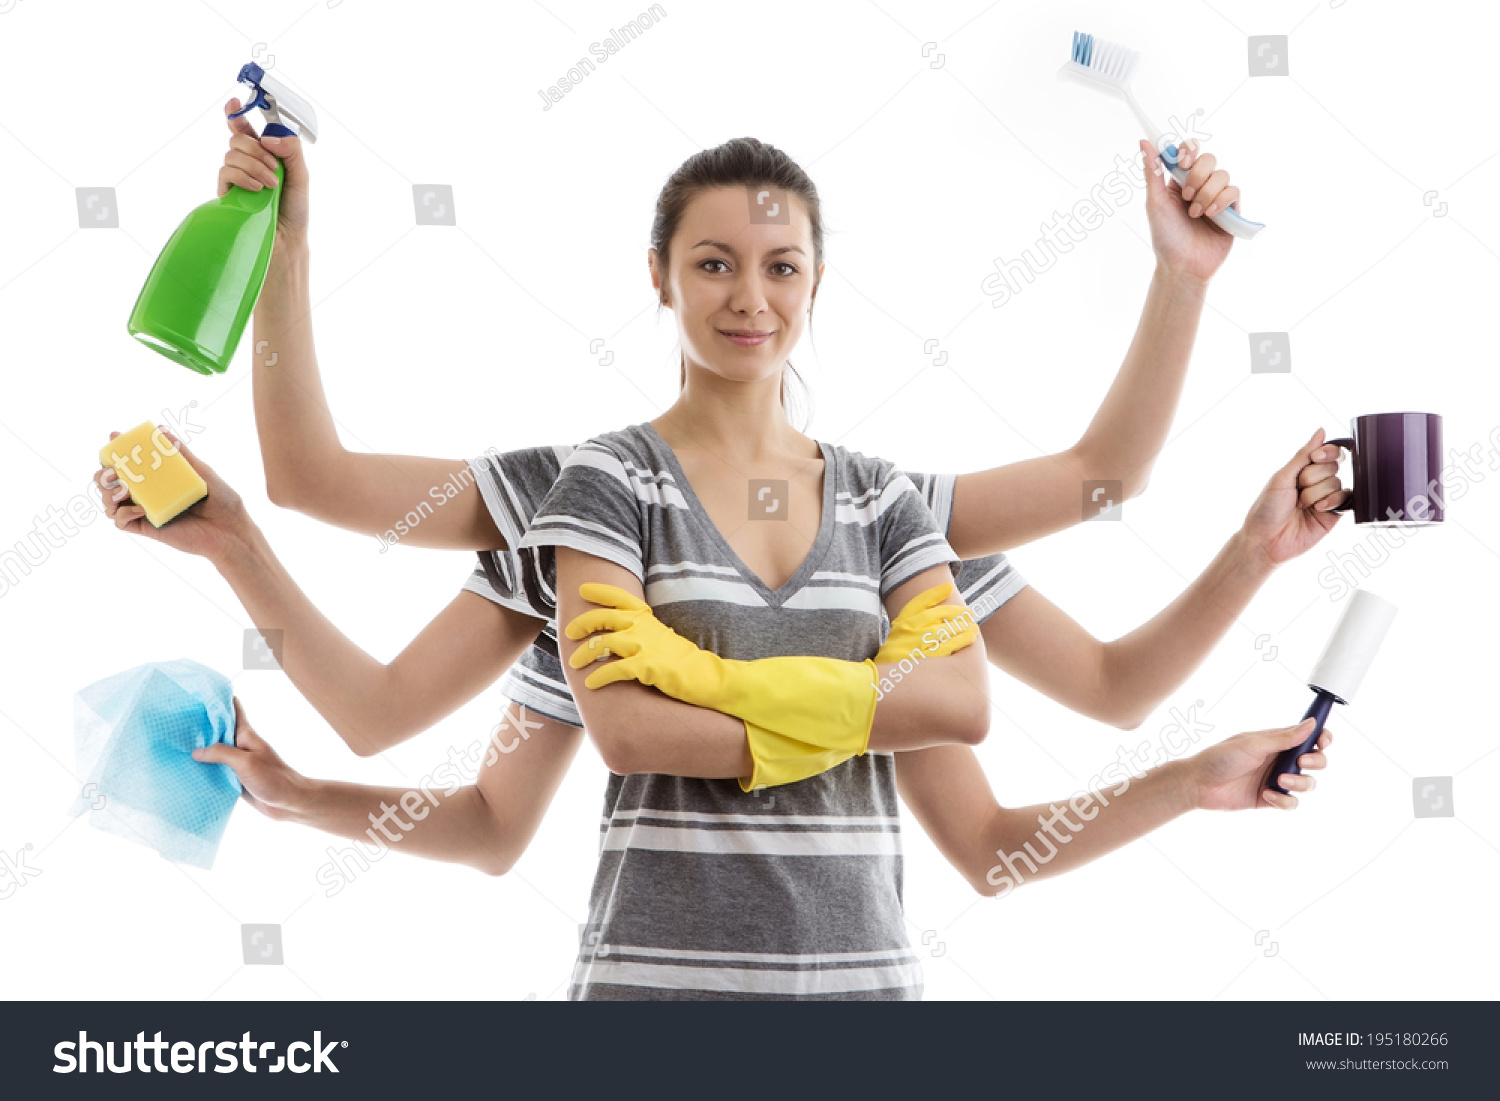 Woman With Many Arms Getting Ready To Do A Spring Clean Stock Photo ...